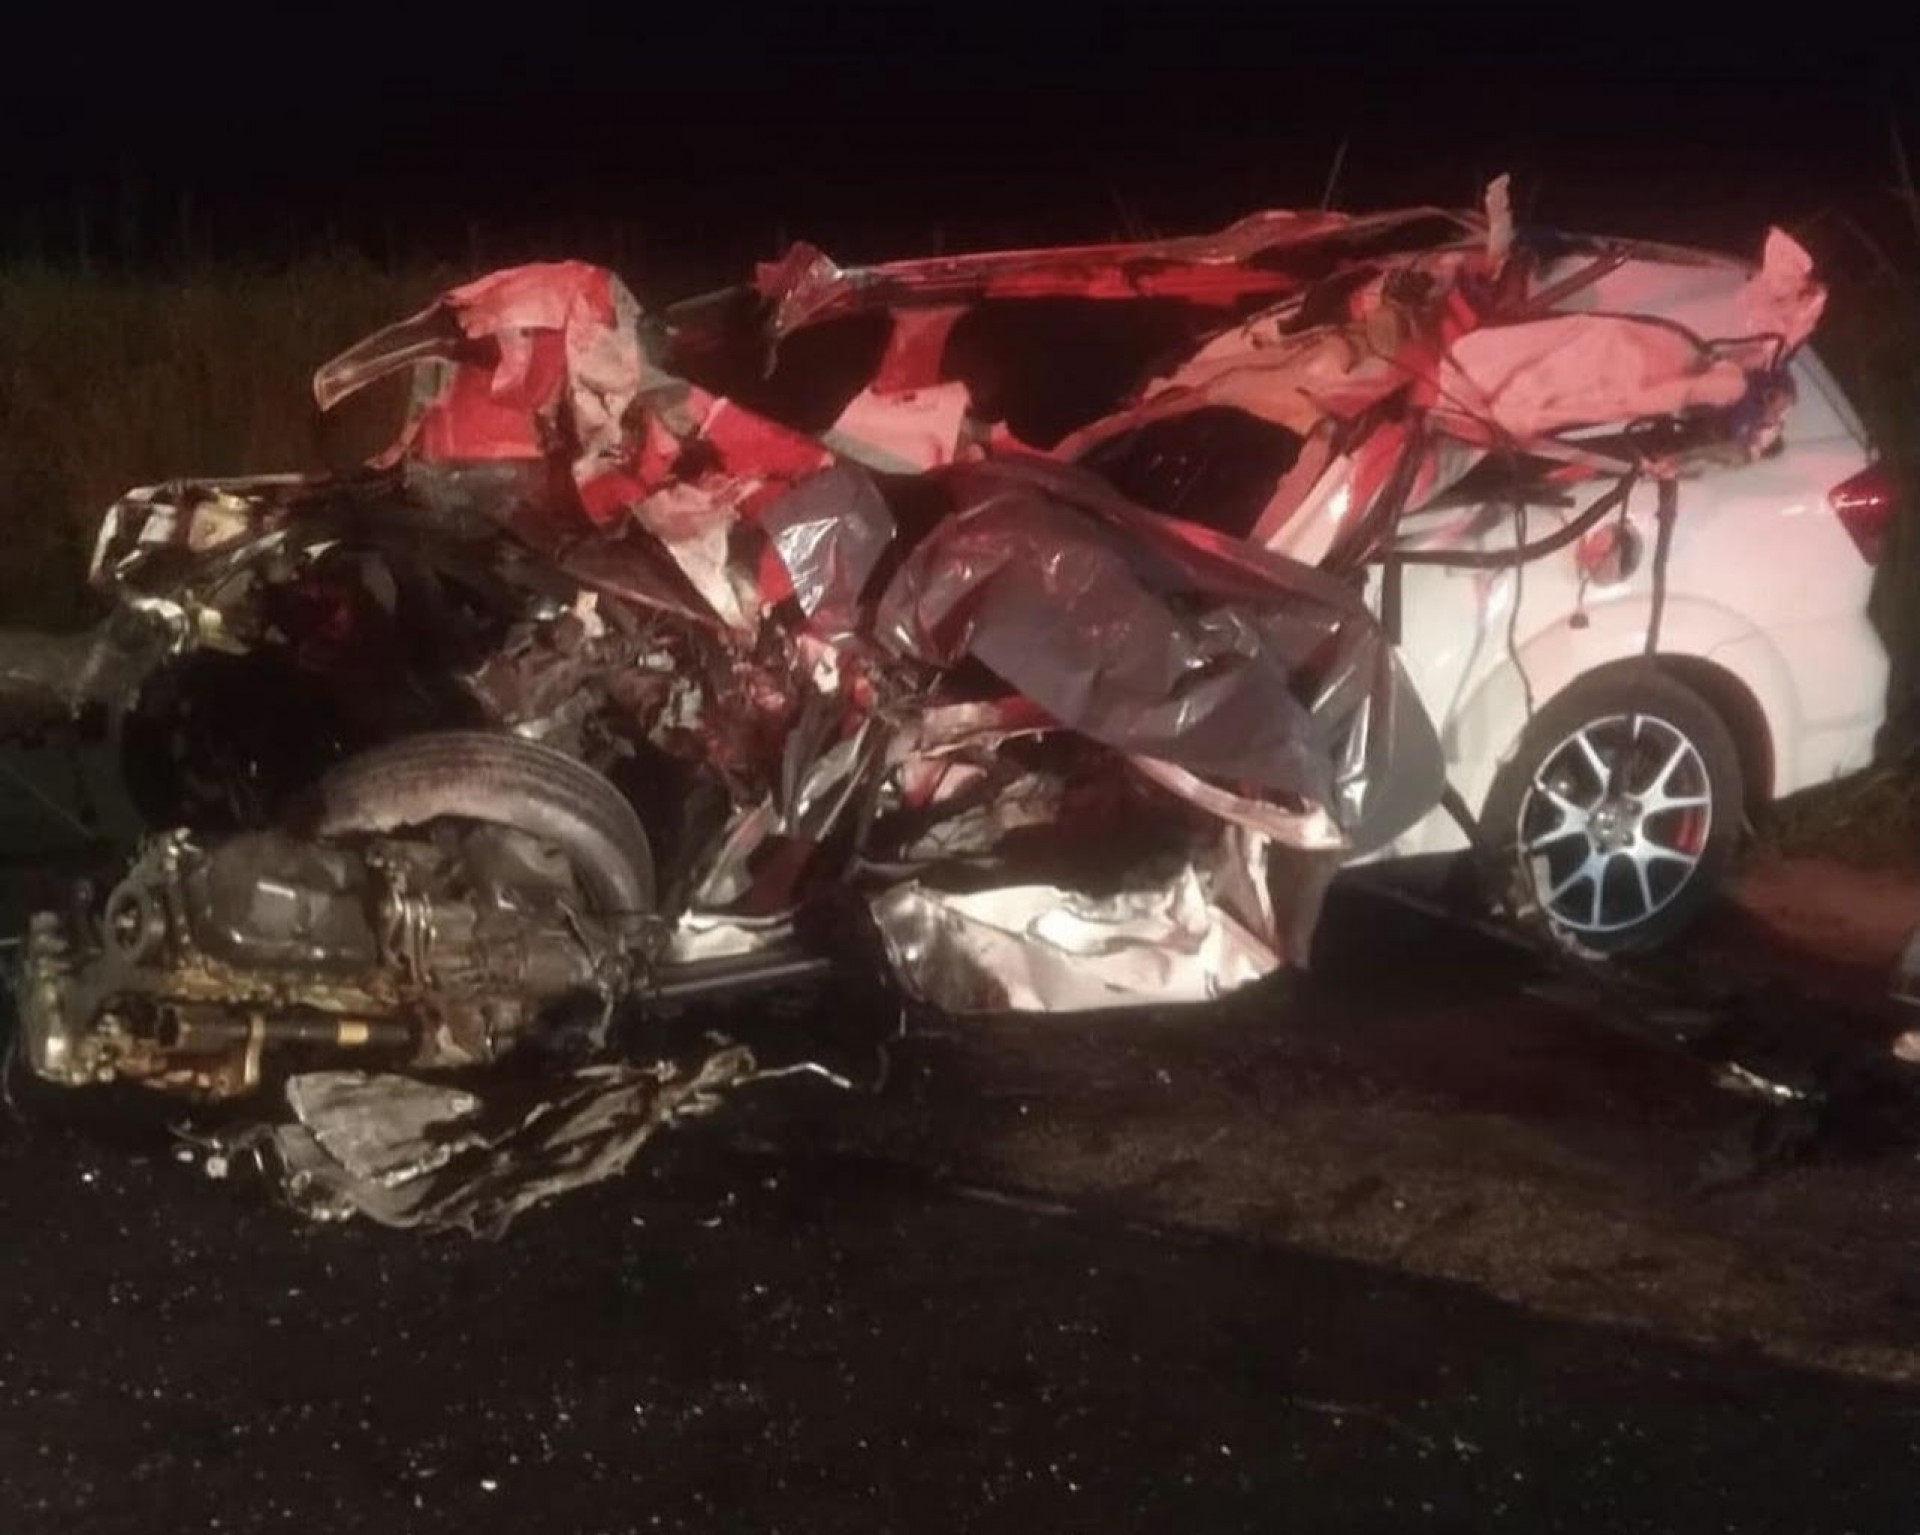 The impact of the accident was not limited to just the personal tragedy, but also affected the flow of traffic on the road - Photo: Portal Cidade 24h